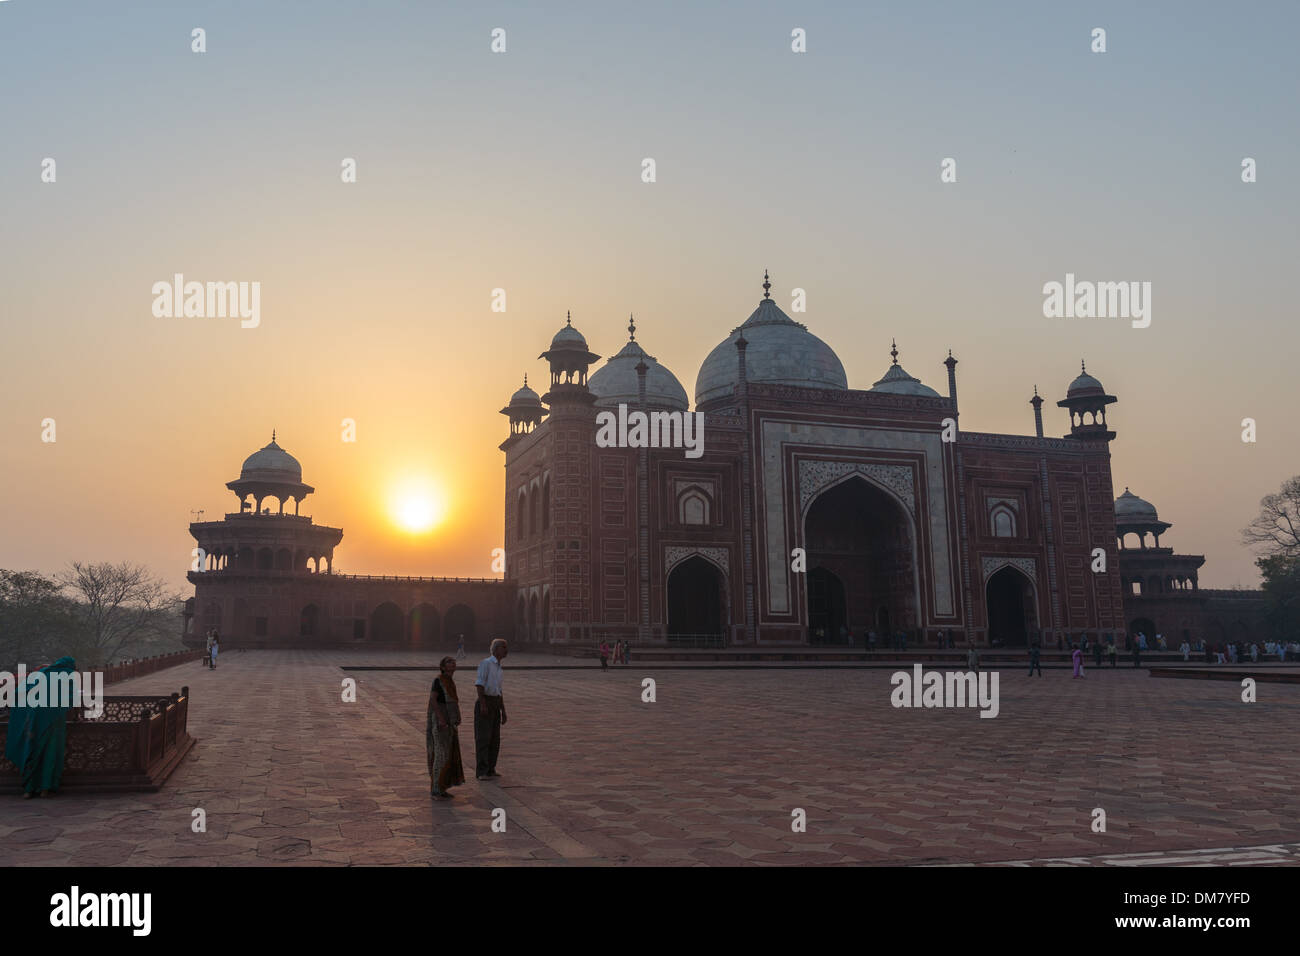 The stunning indo-islamic architecture of the Taj Mahal is complimented by the soft sunrise light over the palace in Agra, India. Stock Photo